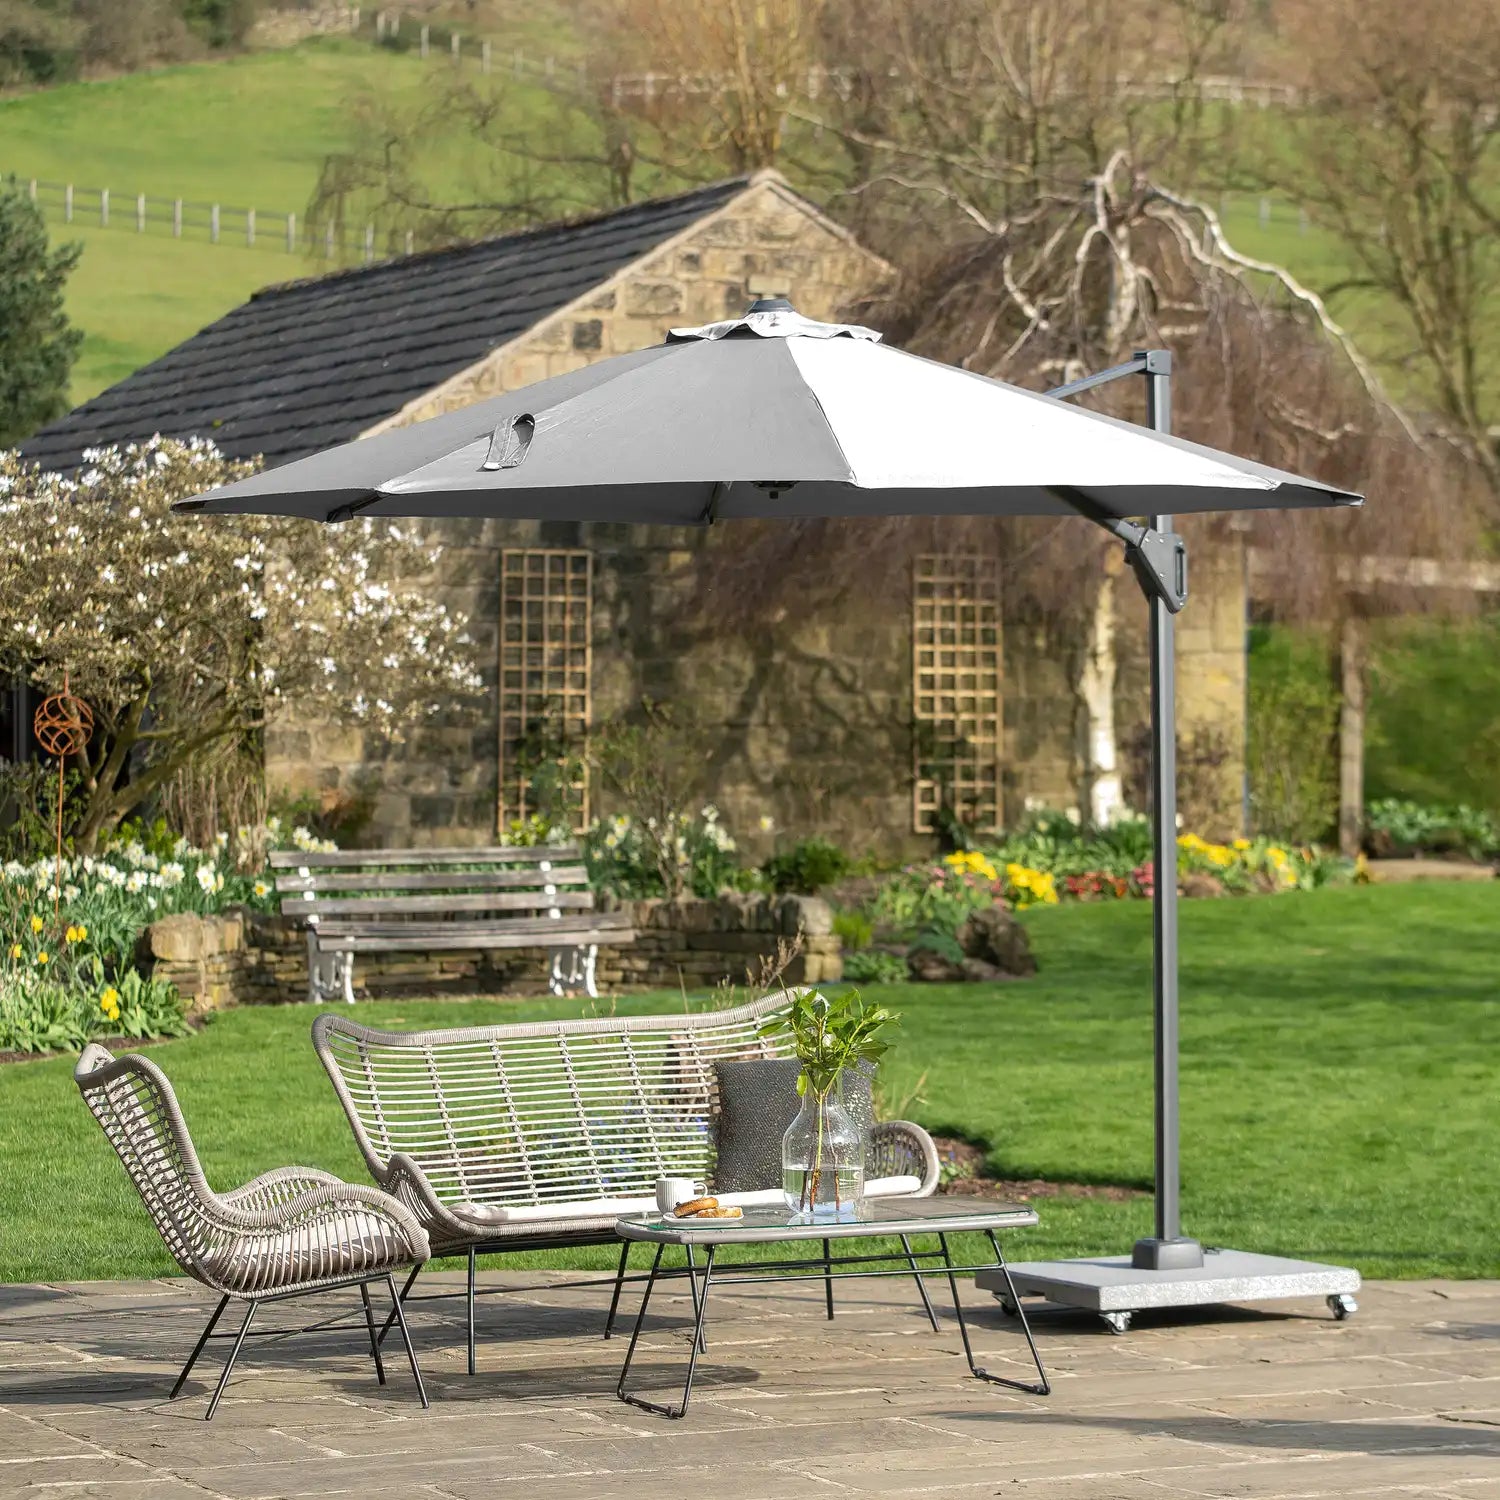 Platinum Voyager T1 3m Round Cantilever Parasol in Luna Grey – Click Style